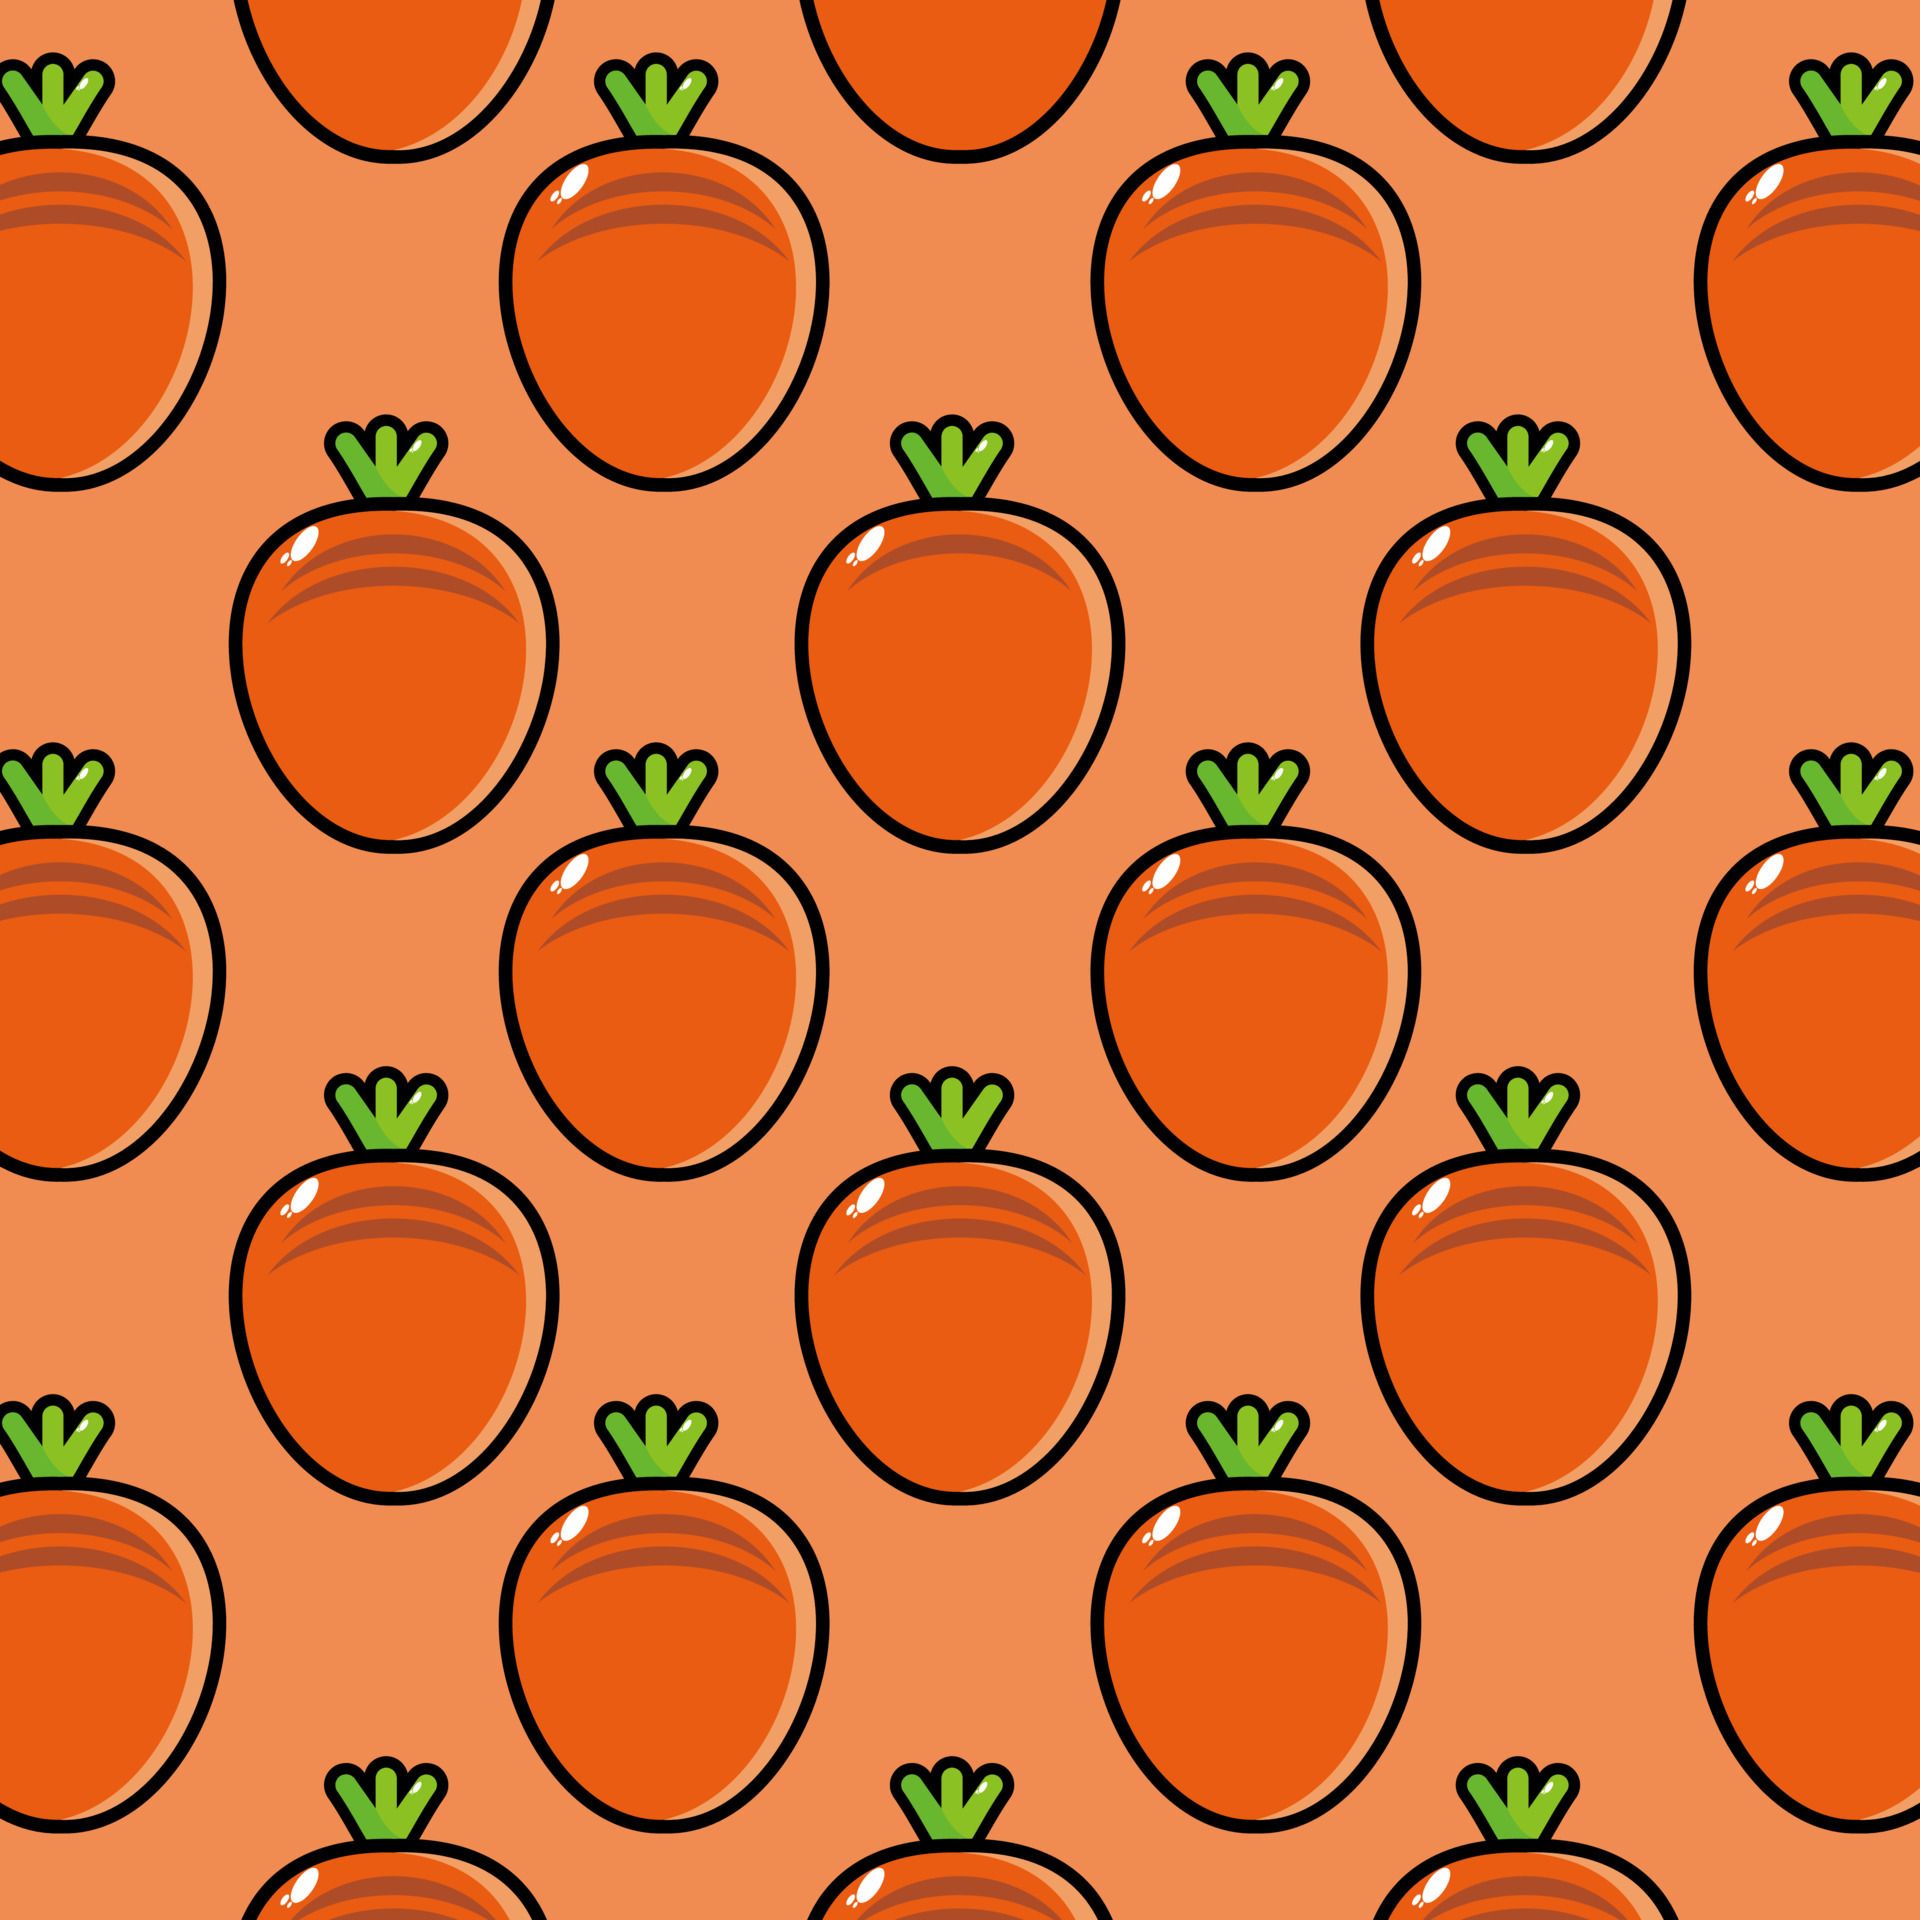 A pattern of carrots on a pink background - Orange